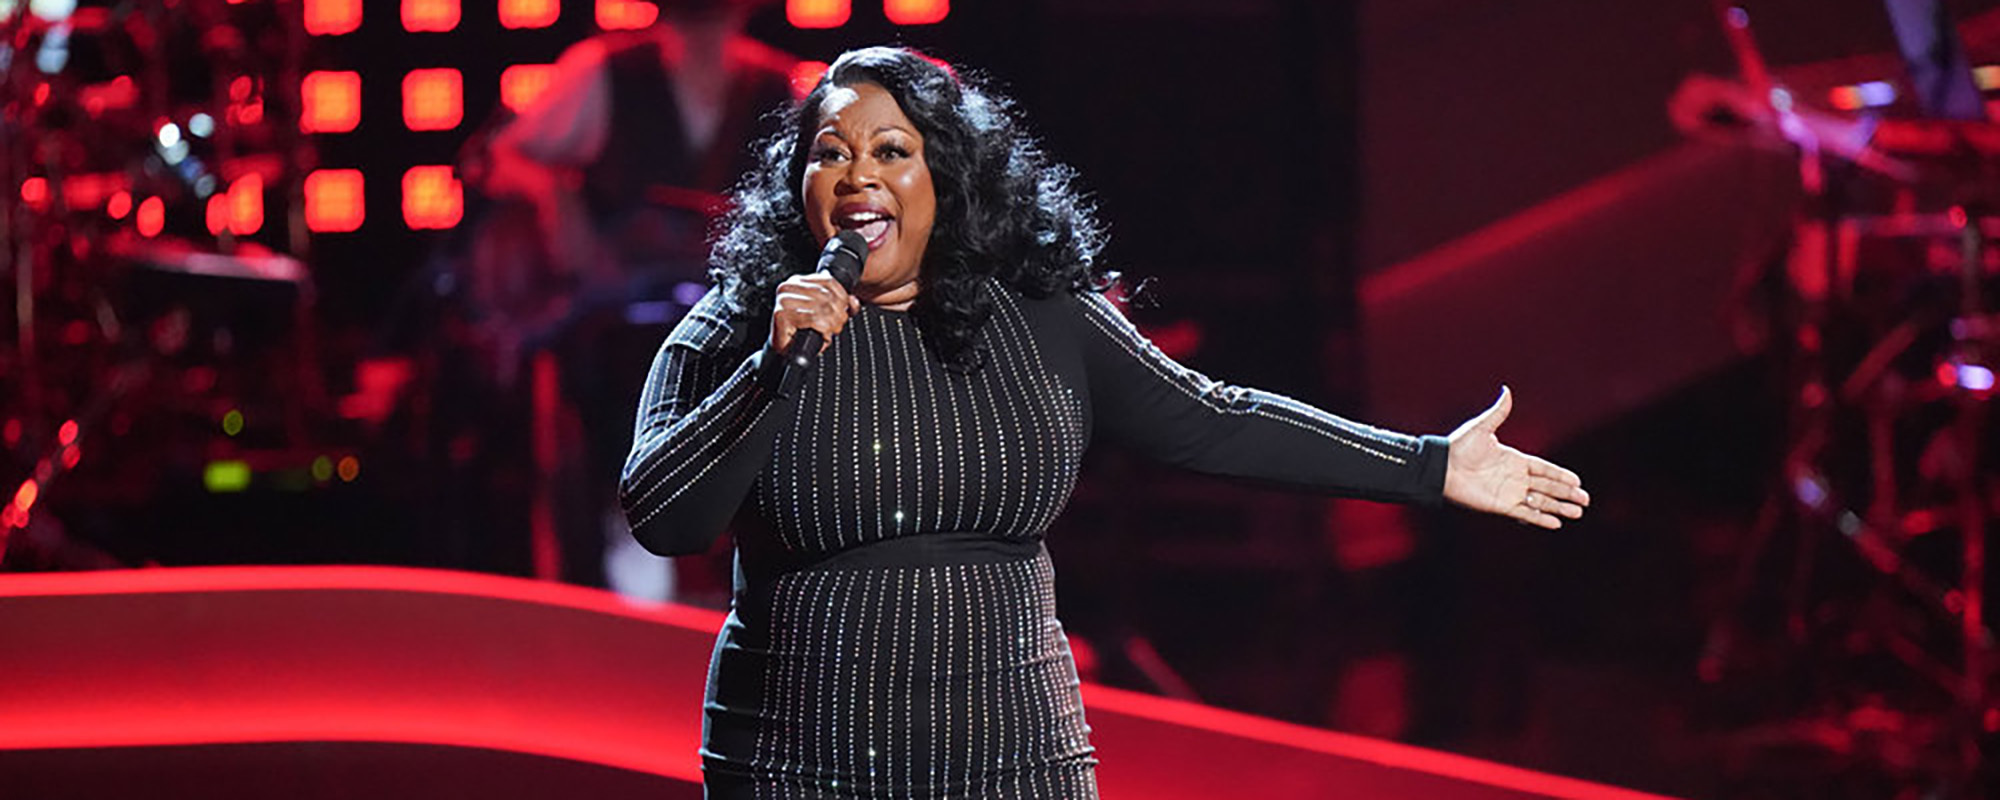 Ms. Monét Belts Out Soulful Version of “Best of My Love” on ‘The Voice’ Knockout Round Monday